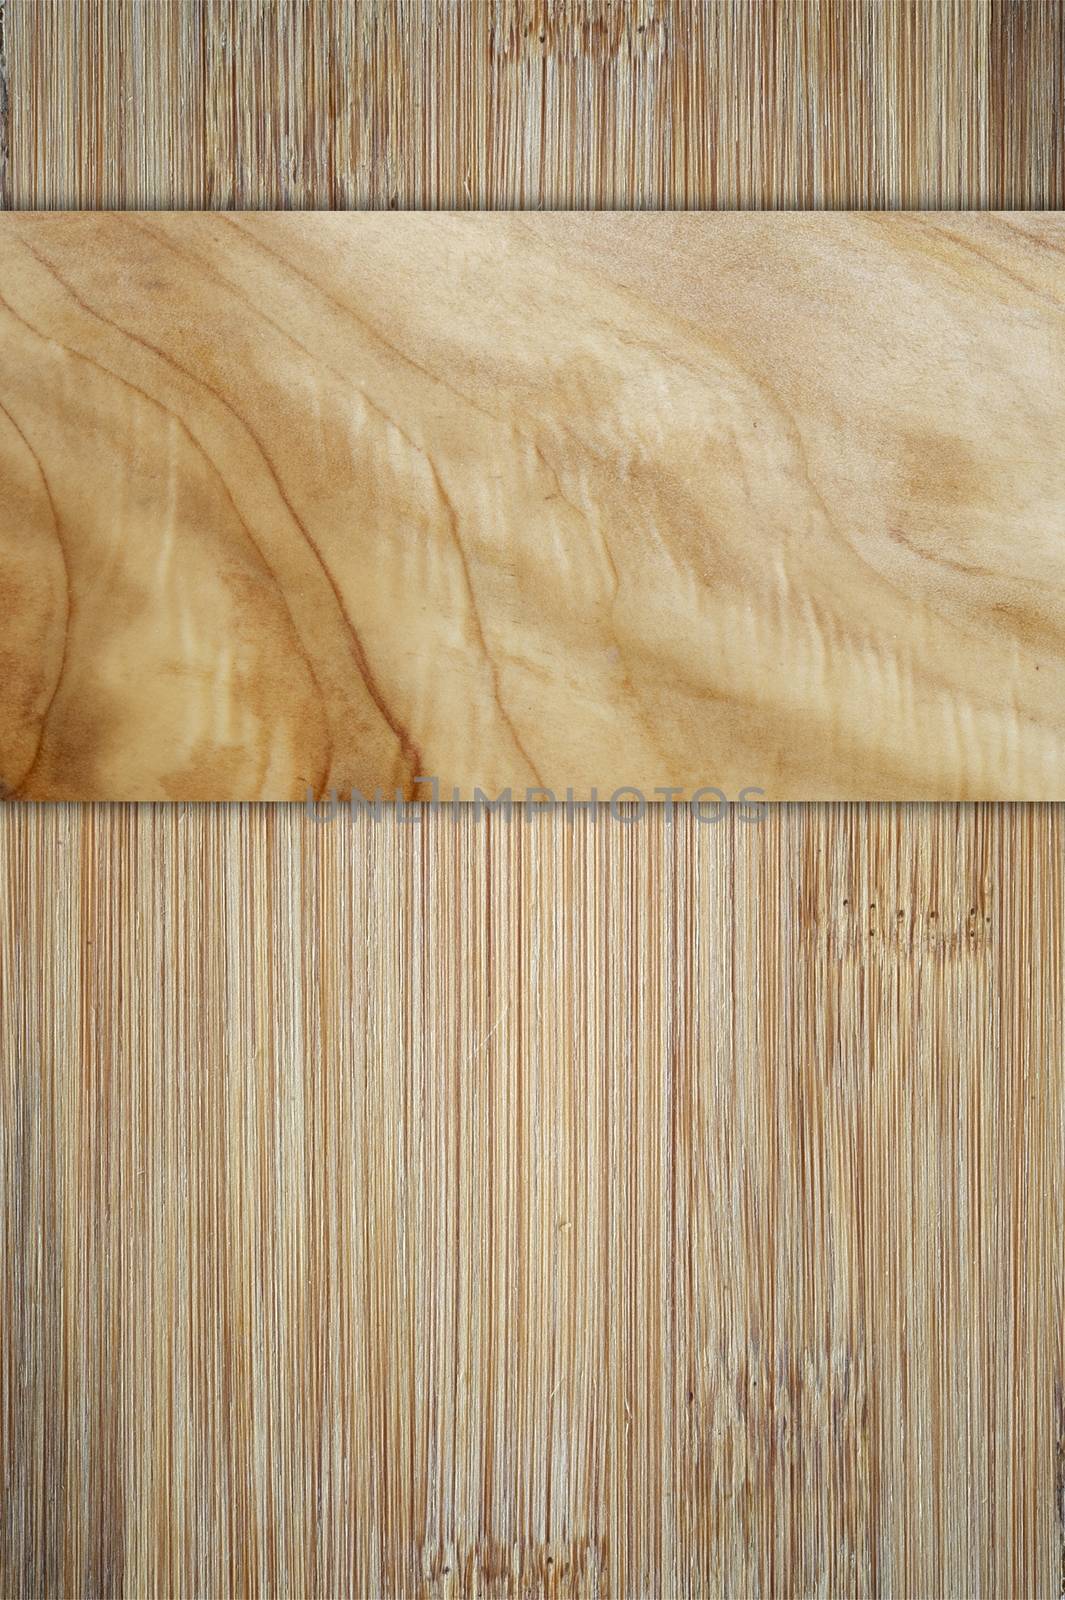 Wood Design Background. Two Different Wood Textures Copy Space. Vertcial Design.